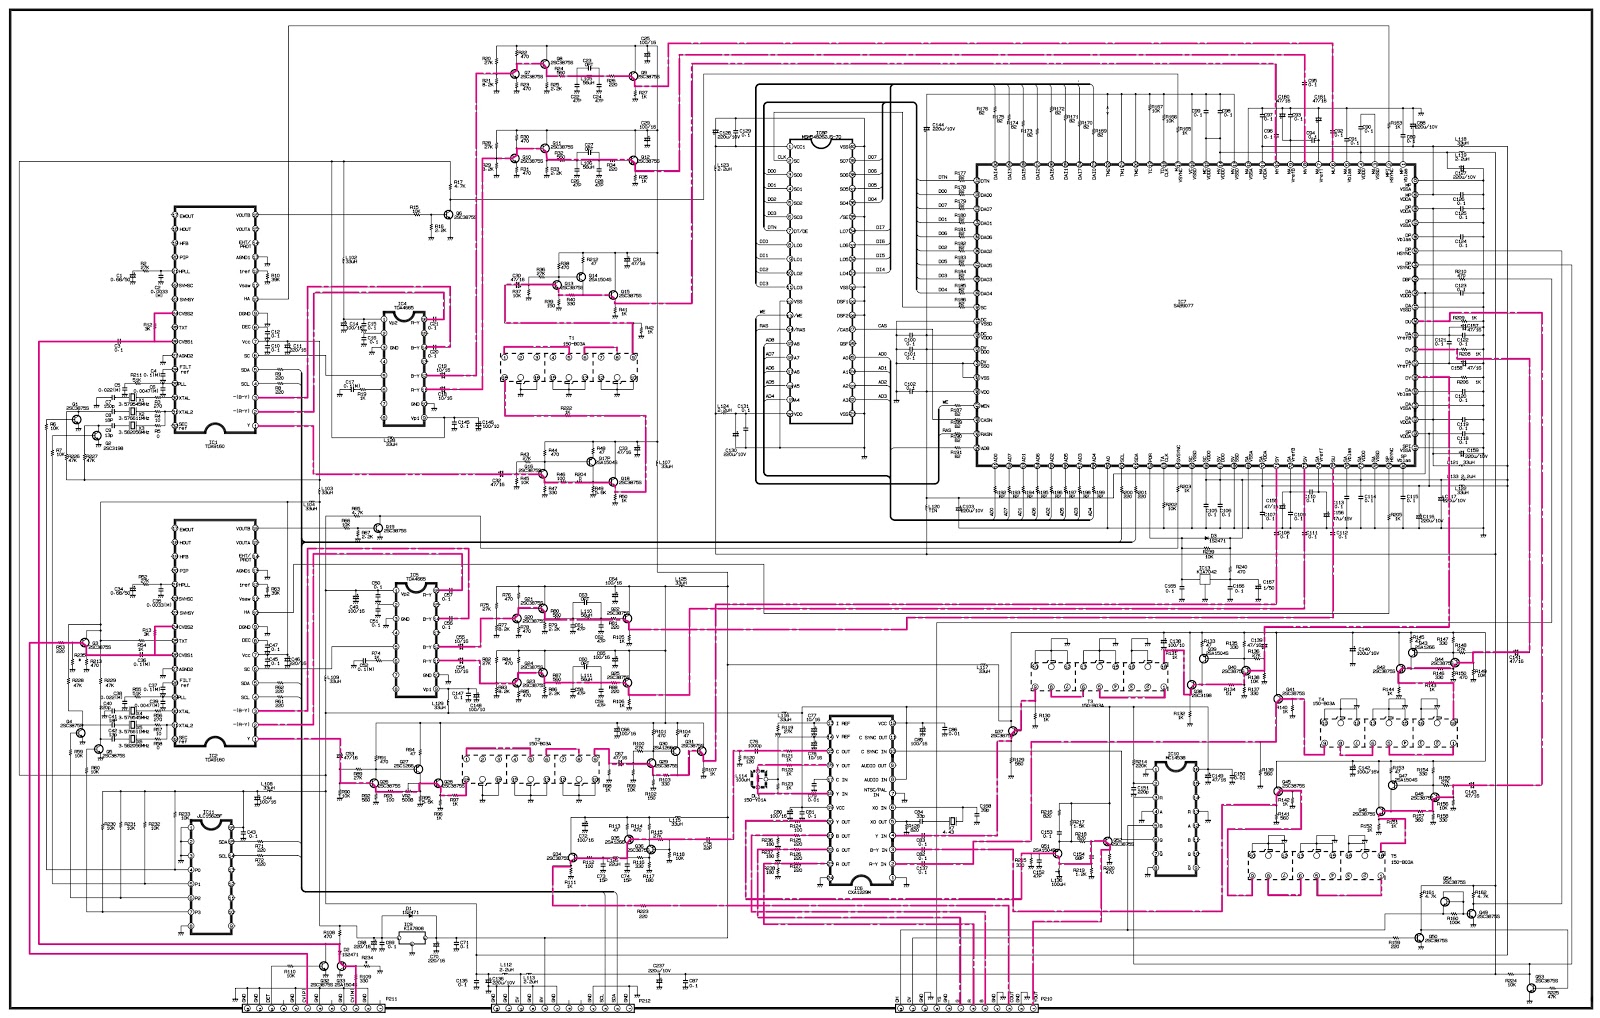 WP32A30 – LG 32 inch CRT TV – Circuit Diagram | Schematic